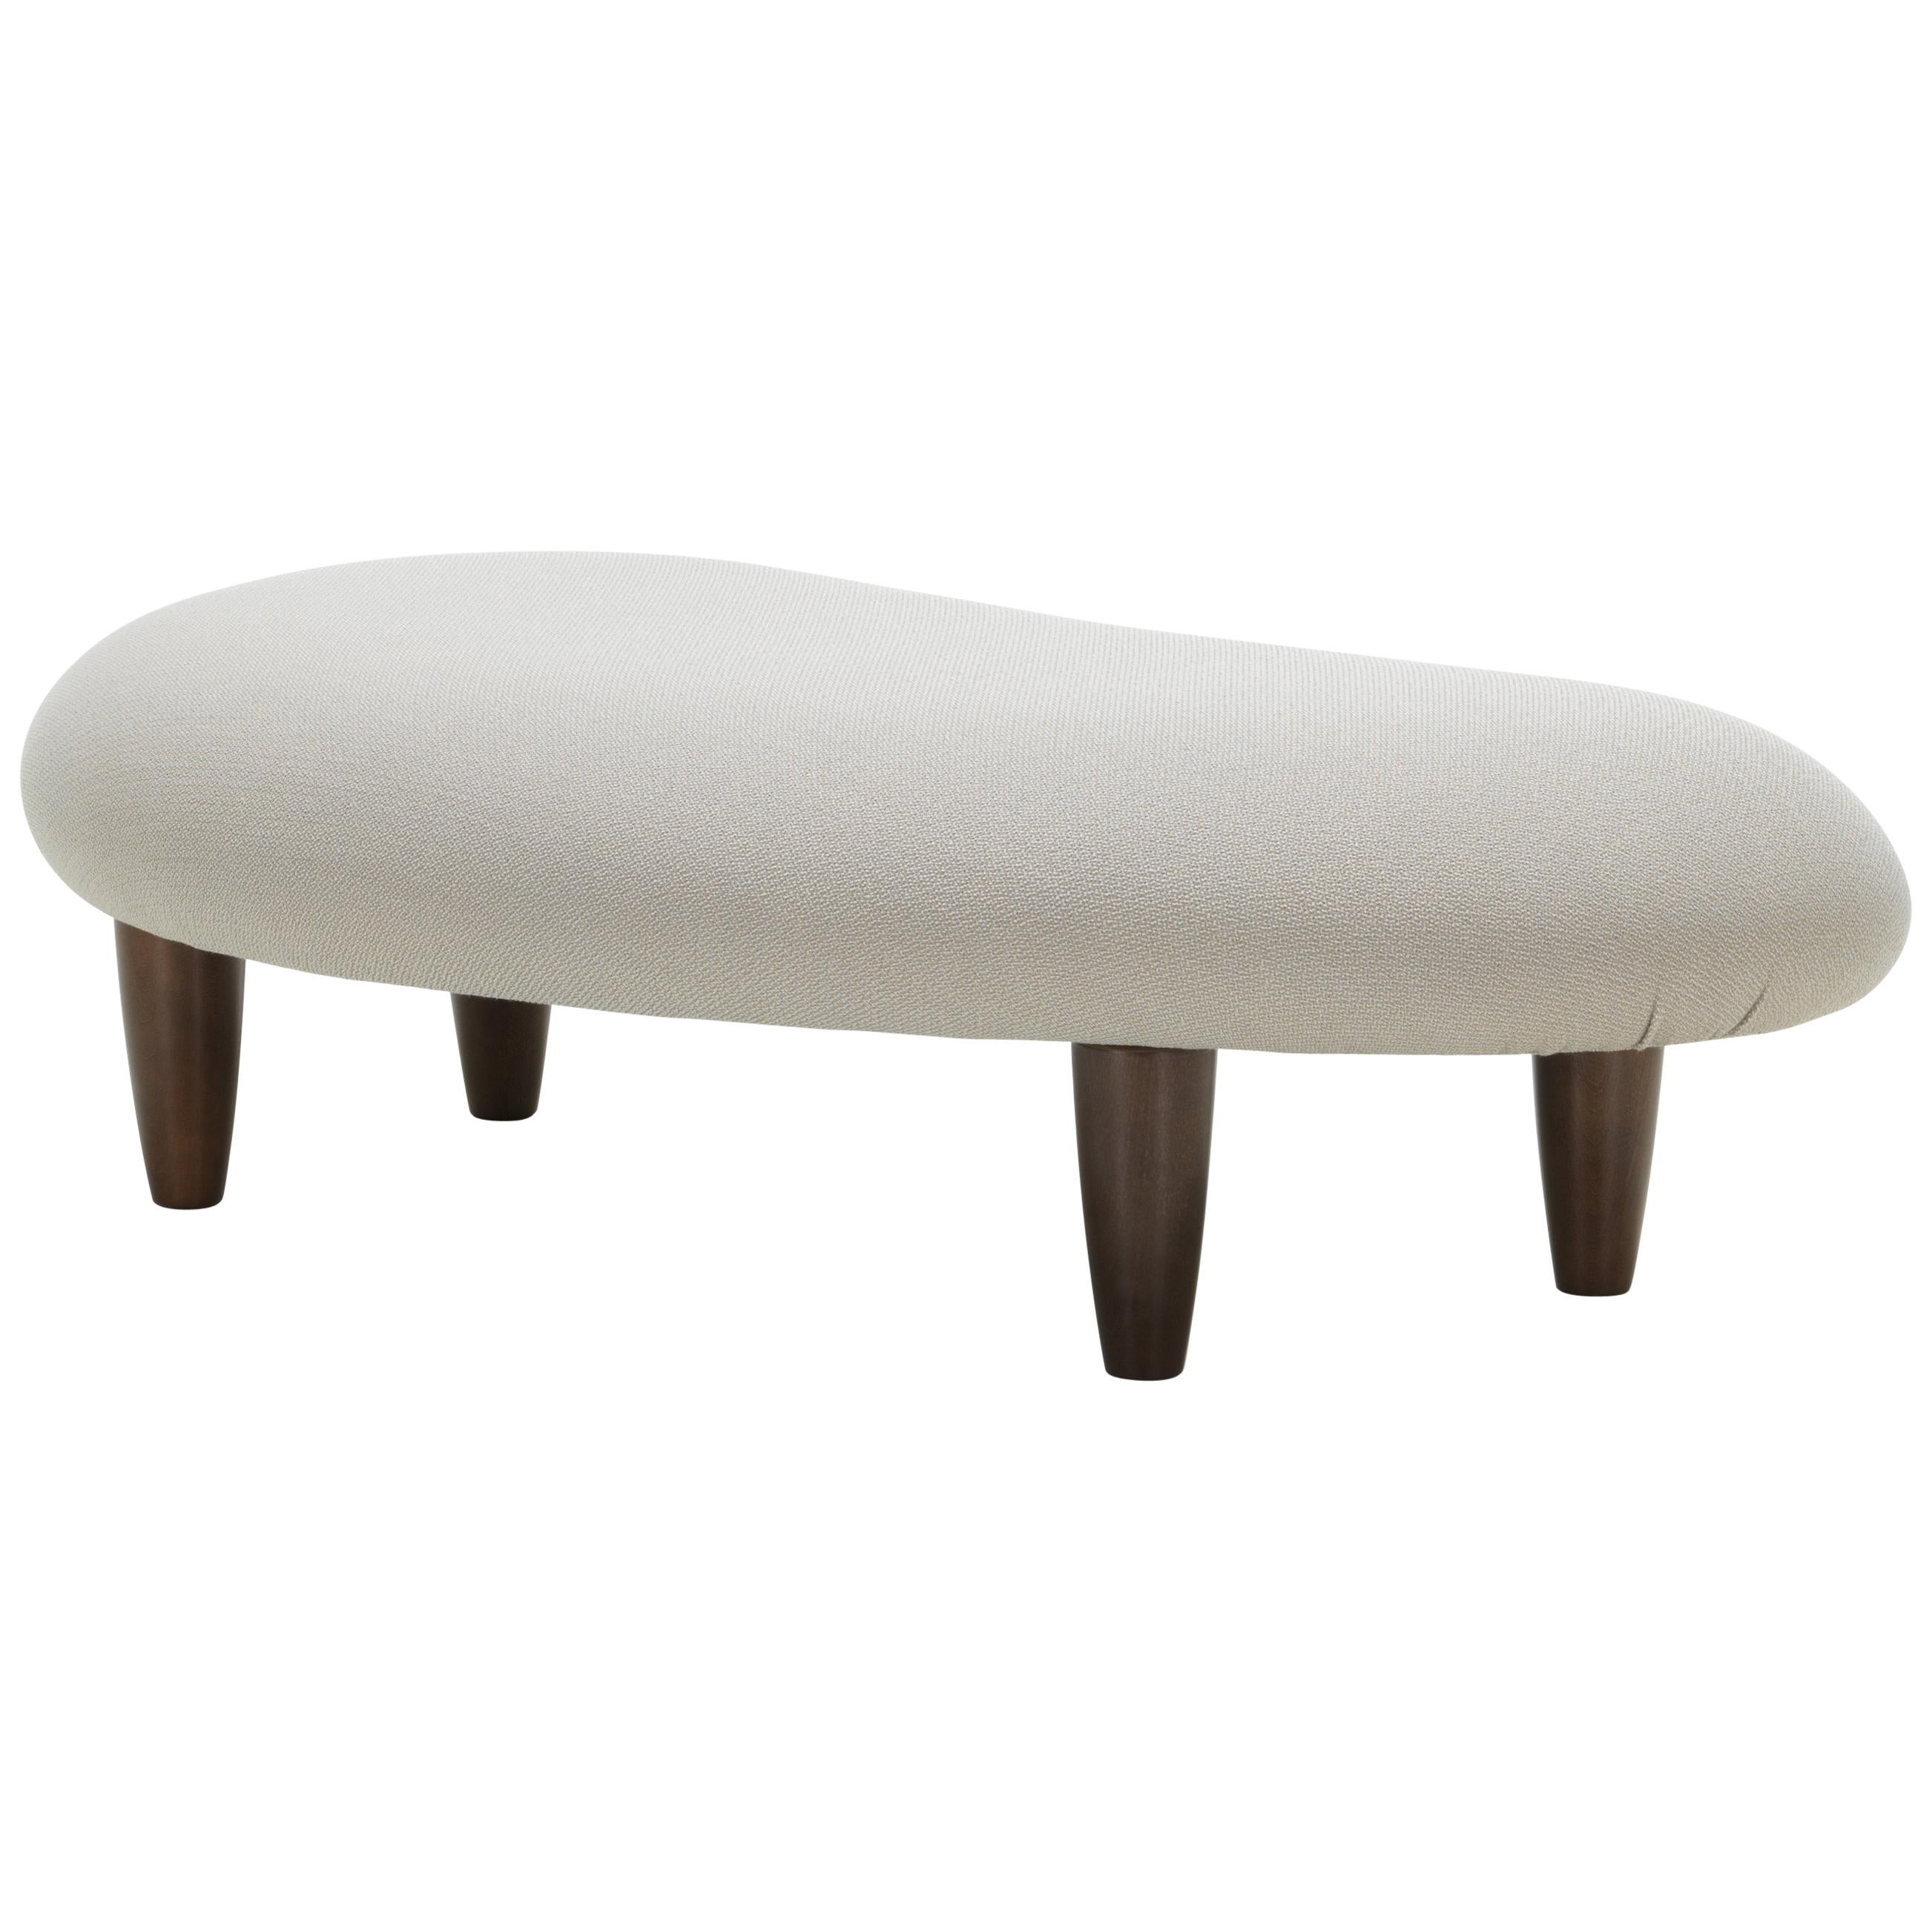 Vitra Freeform Ottoman in Rock Credo and Maple Legs by Isamu Noguchi For Sale